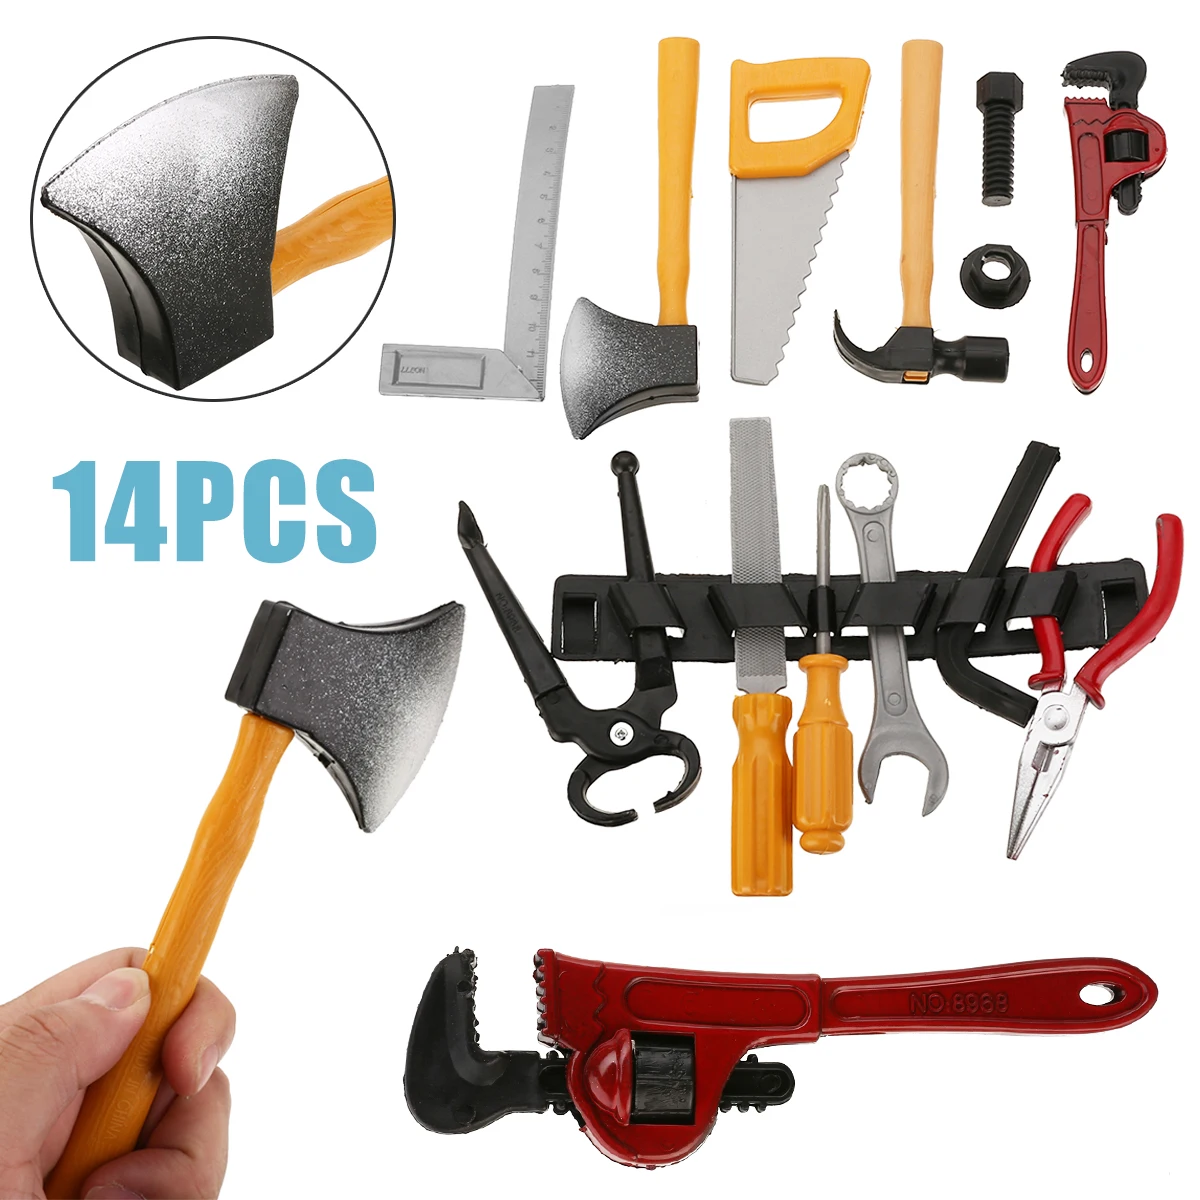 

14pcs Plastic Small Size Hammer/Screwdriver/Wrench Repair Tools Toy Set Kids Children Pretend Play Toys